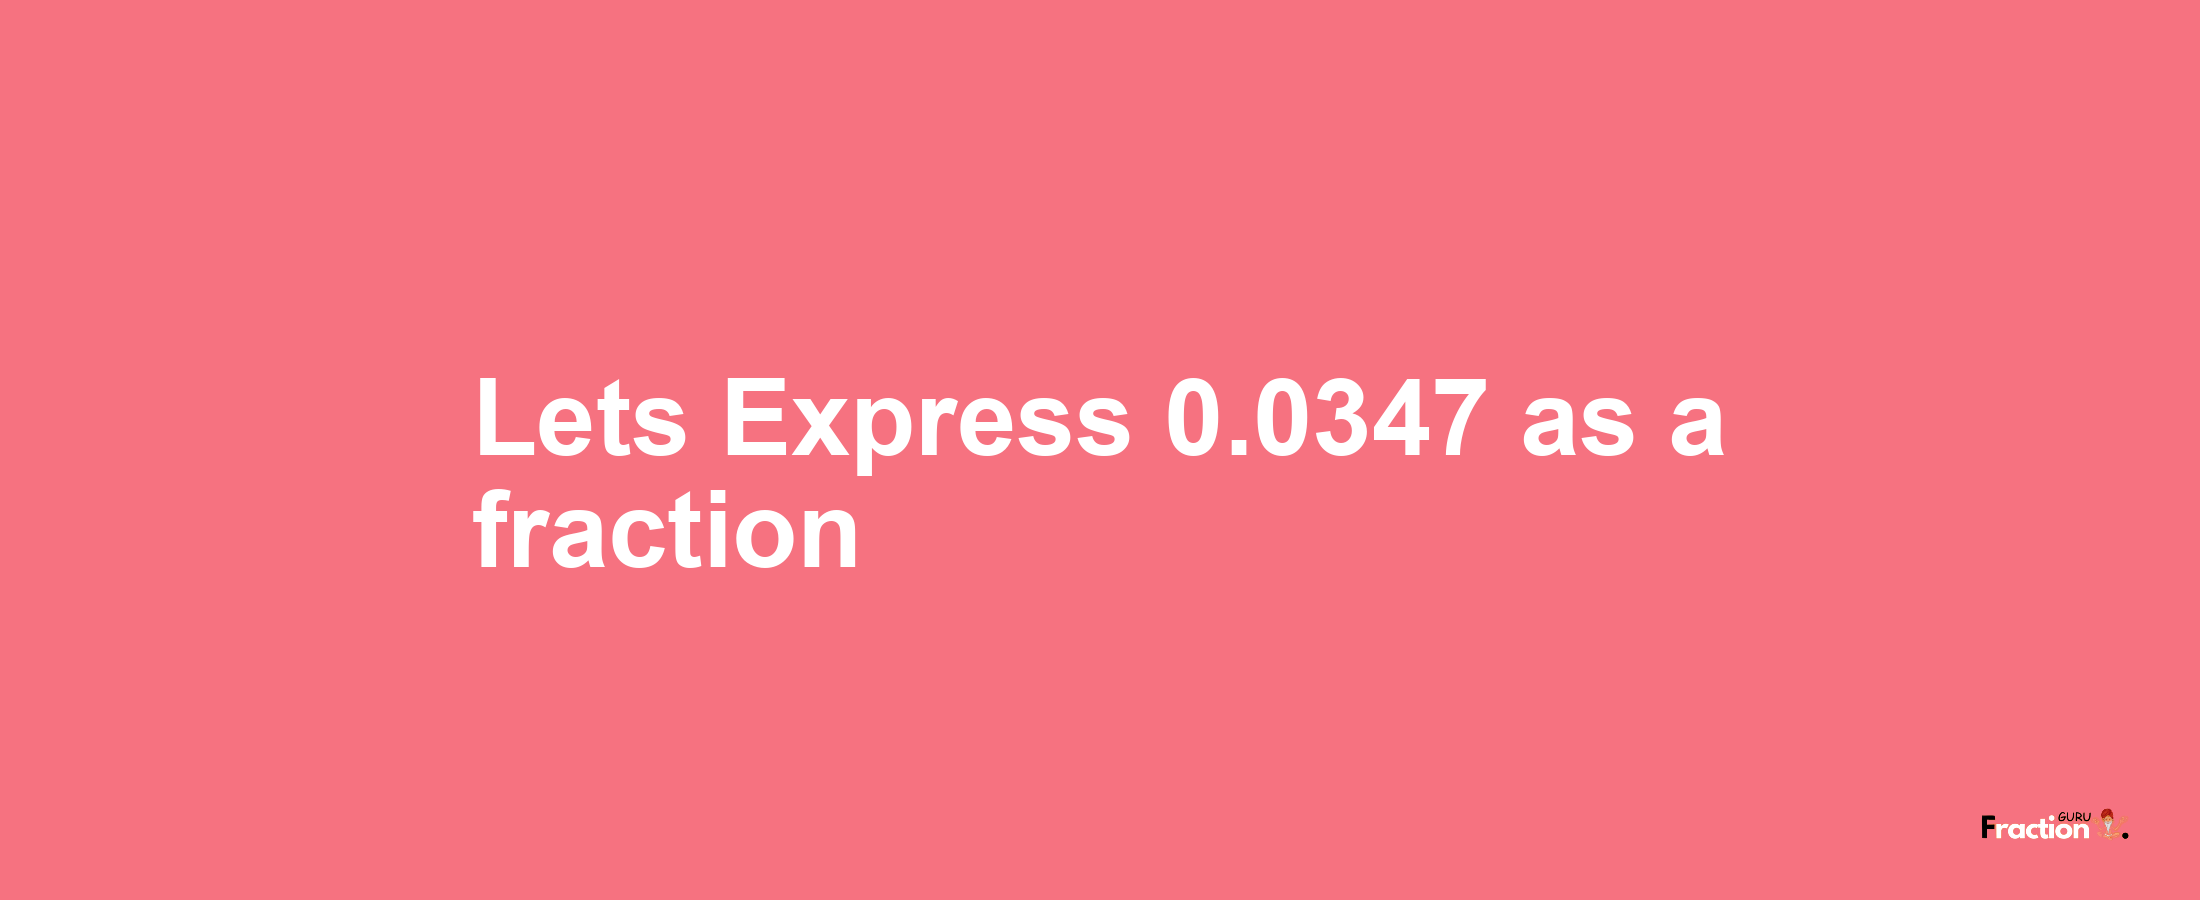 Lets Express 0.0347 as afraction